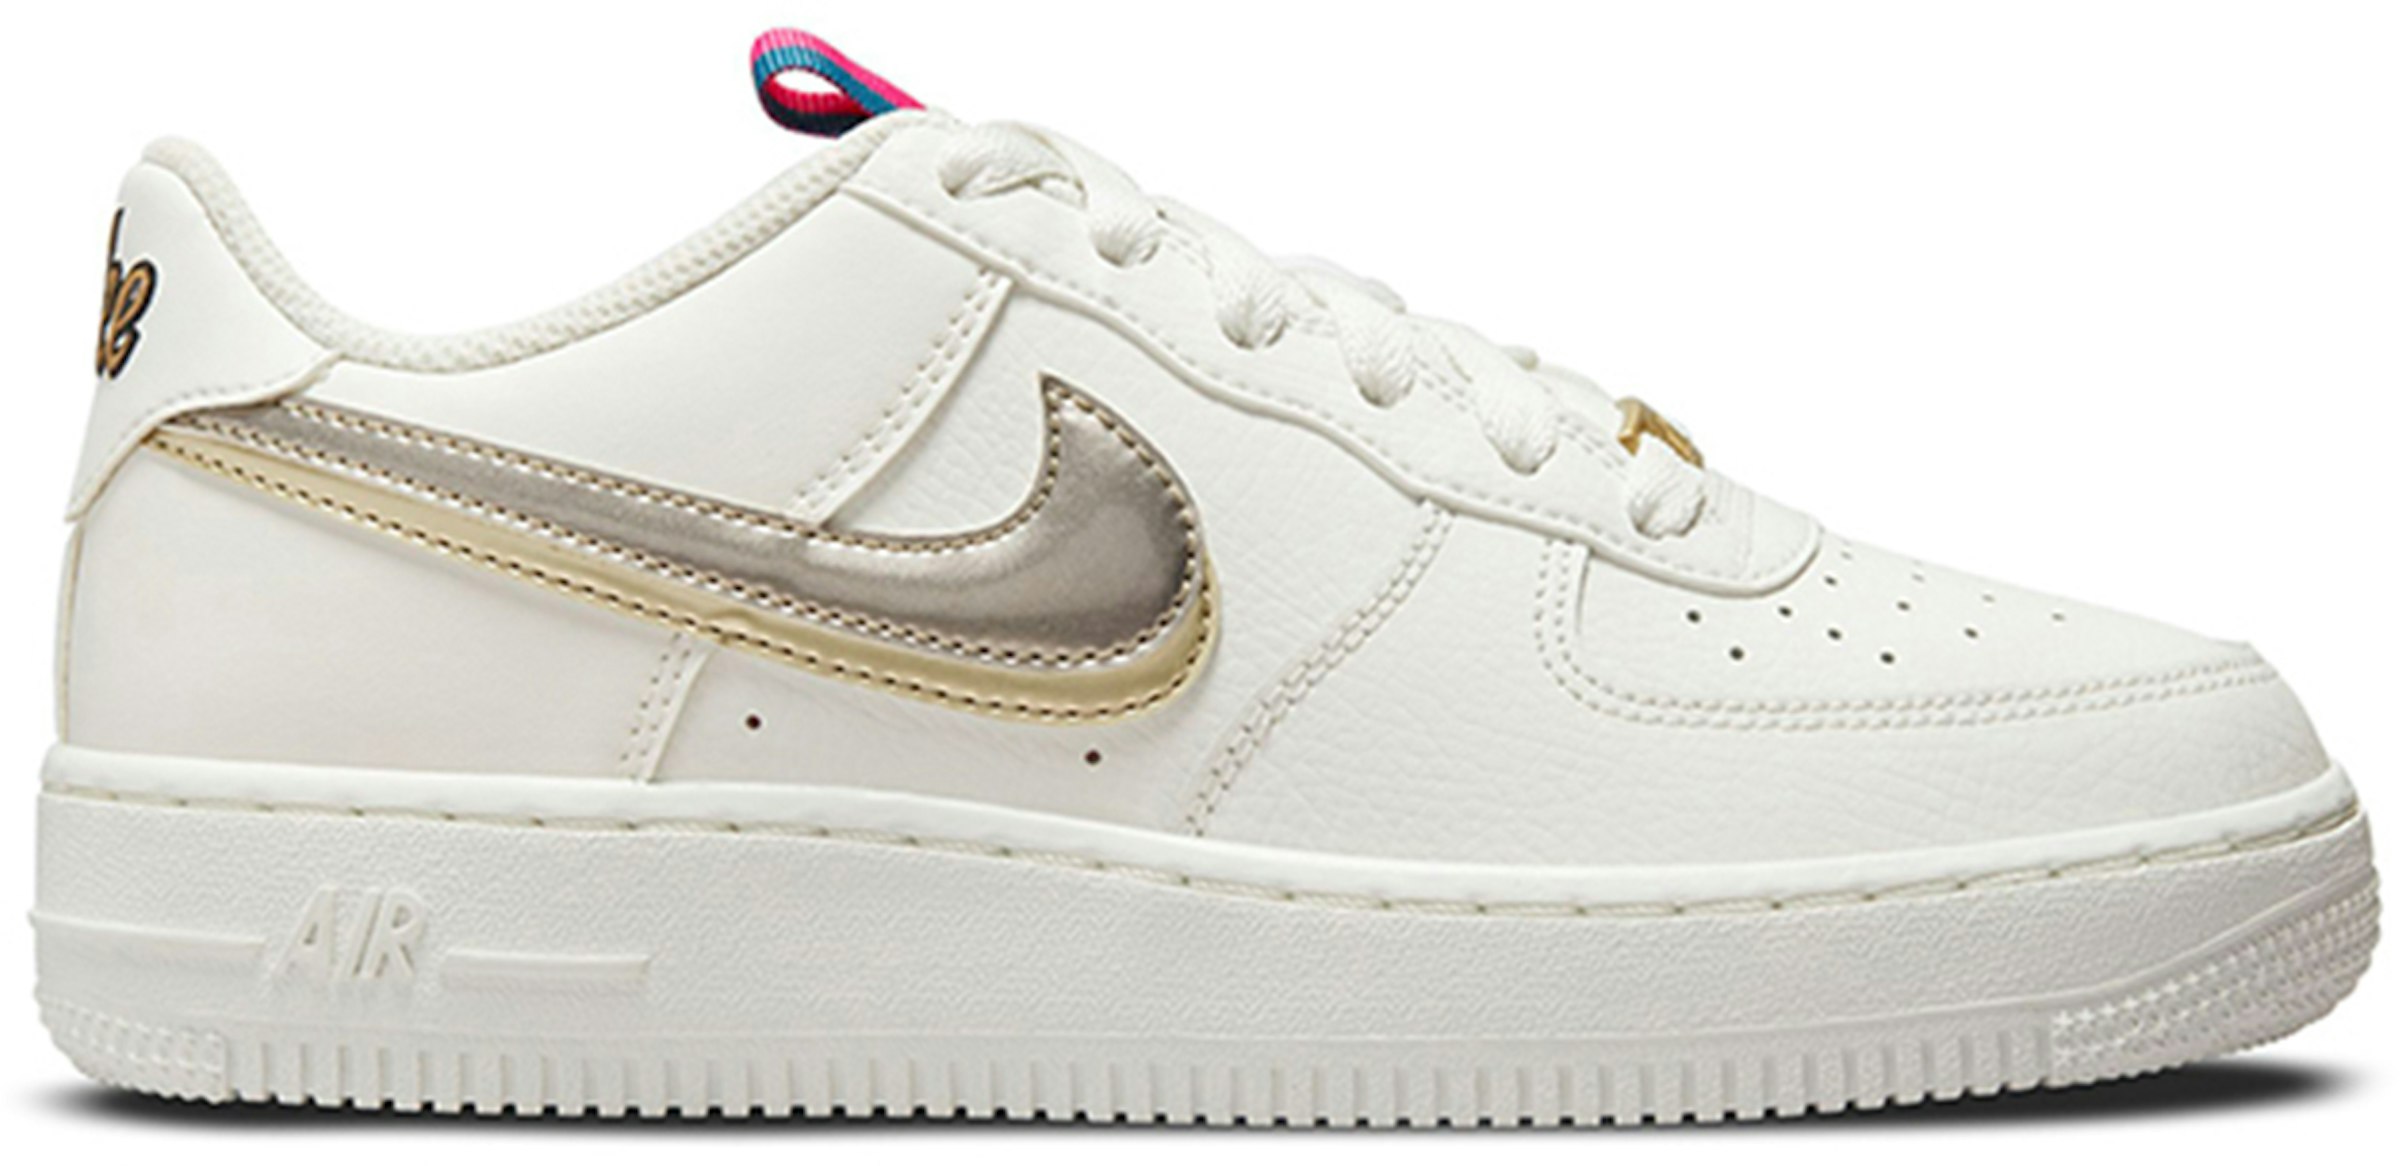 Nike Air Force 1 LV8 Double Silver Gold (GS) Kids' DH9595-001 - US